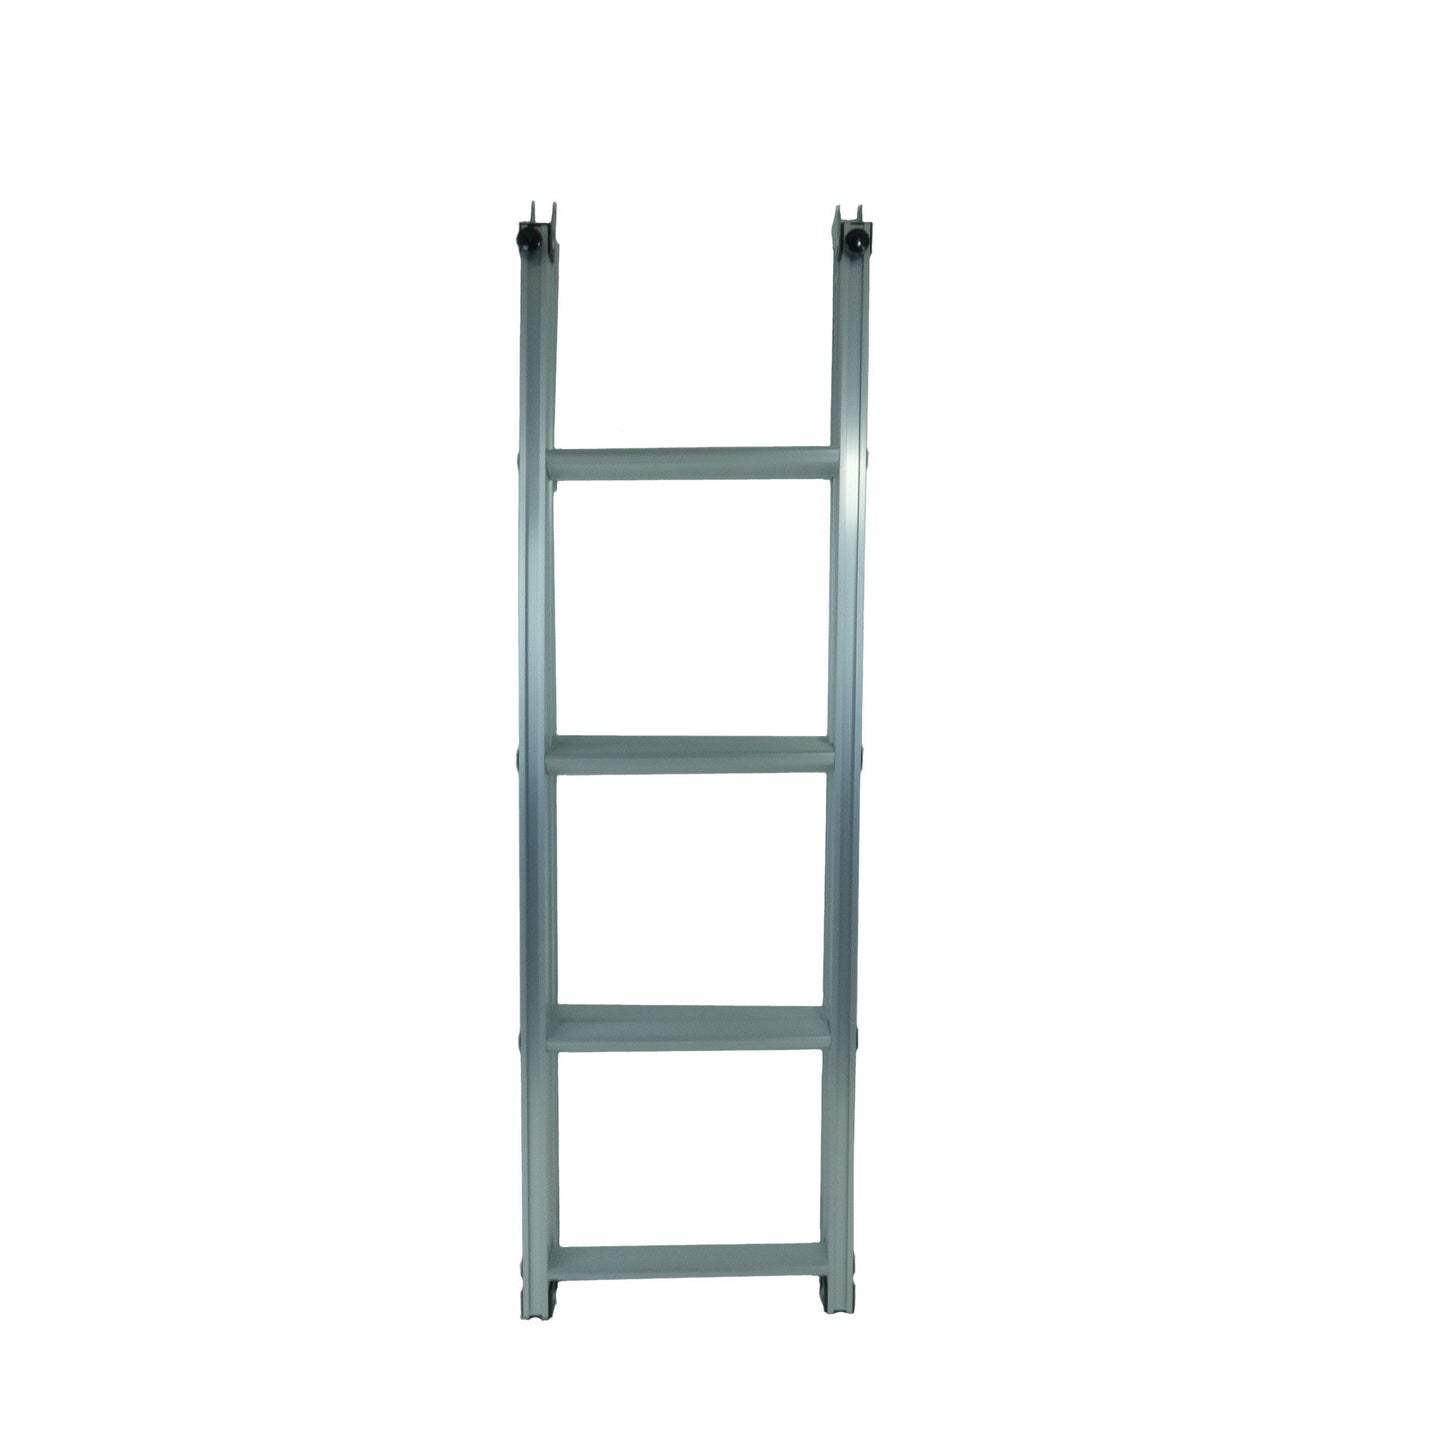 Alloy Ladder for Fold Out Roof Tent -  - sold by Direct4x4